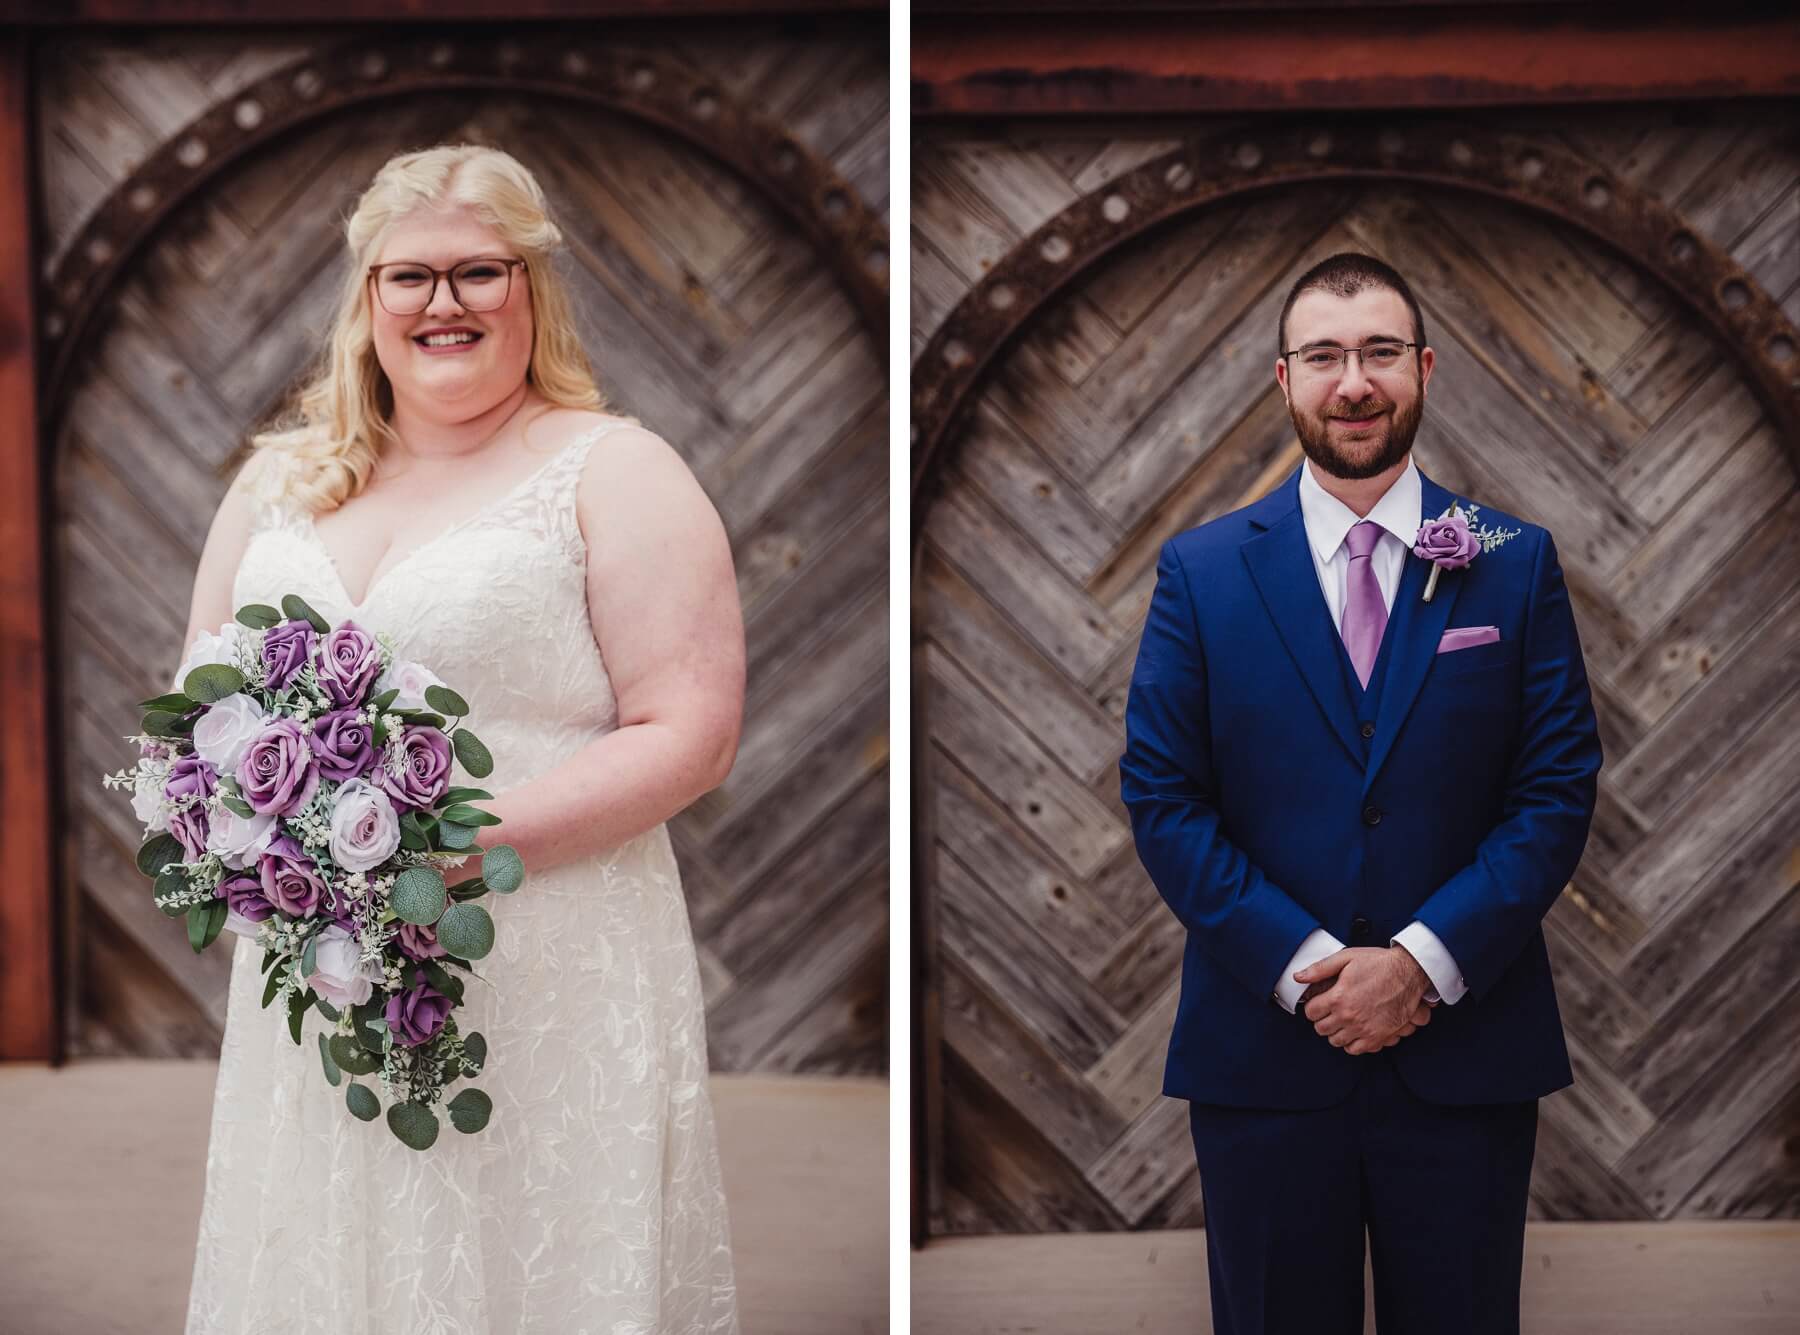 Bride wearing A-line gown and holding purple bouquet | groom wearing blue suit with purple tie